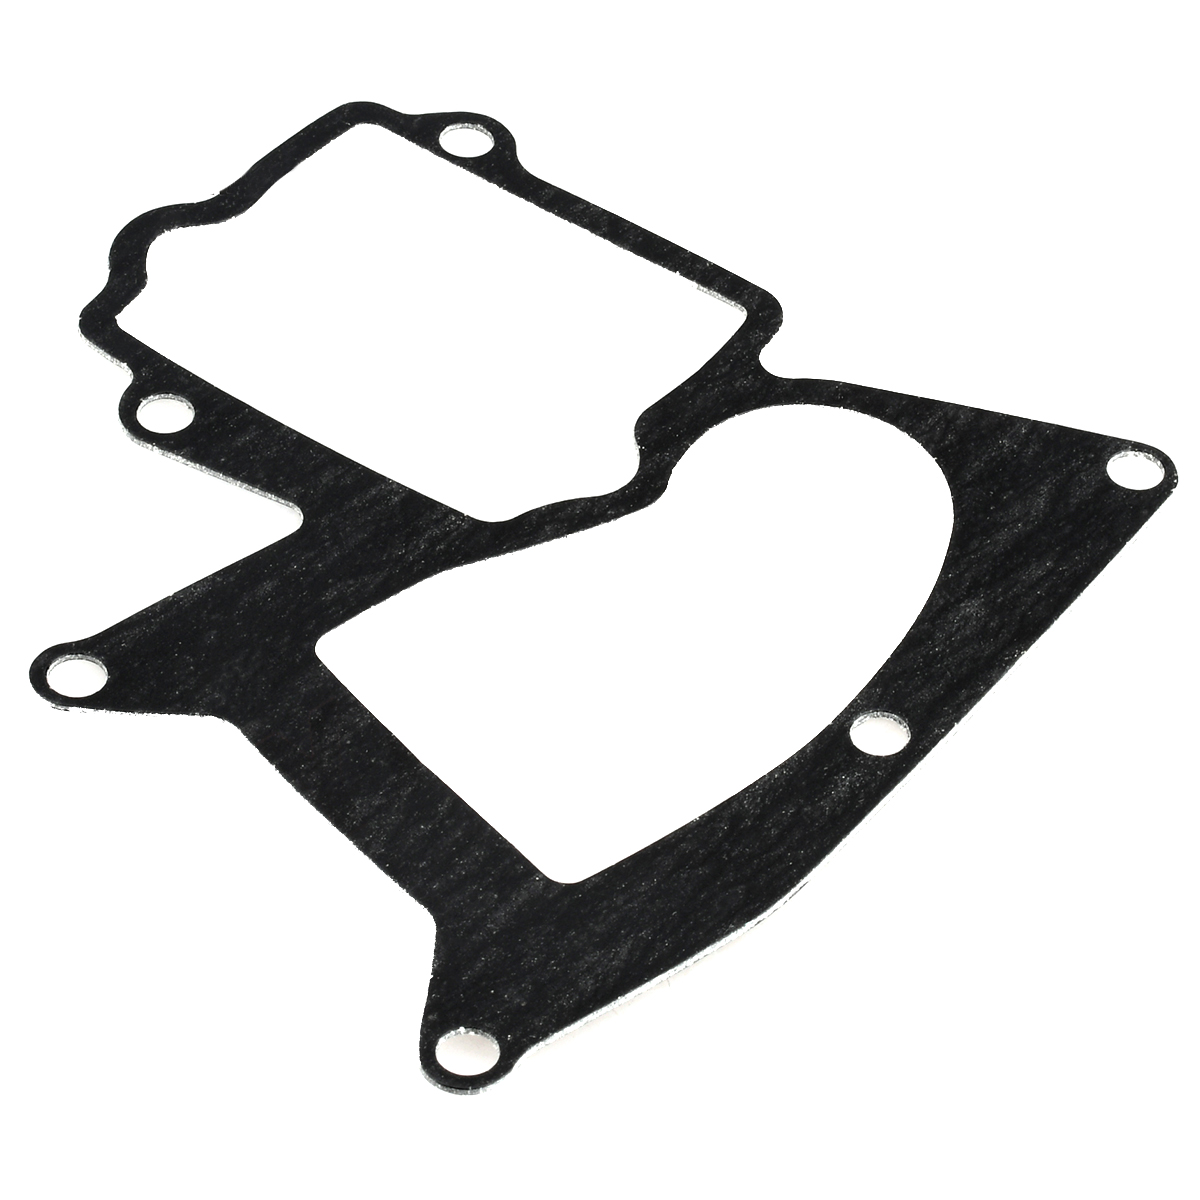 6F5-13645 Gasket, Manifold 1 for yamaha outboard motor 2T 40HP 6F5-13645-A1 6F5-13645-A0 6F5-13645-00 boat engine parts